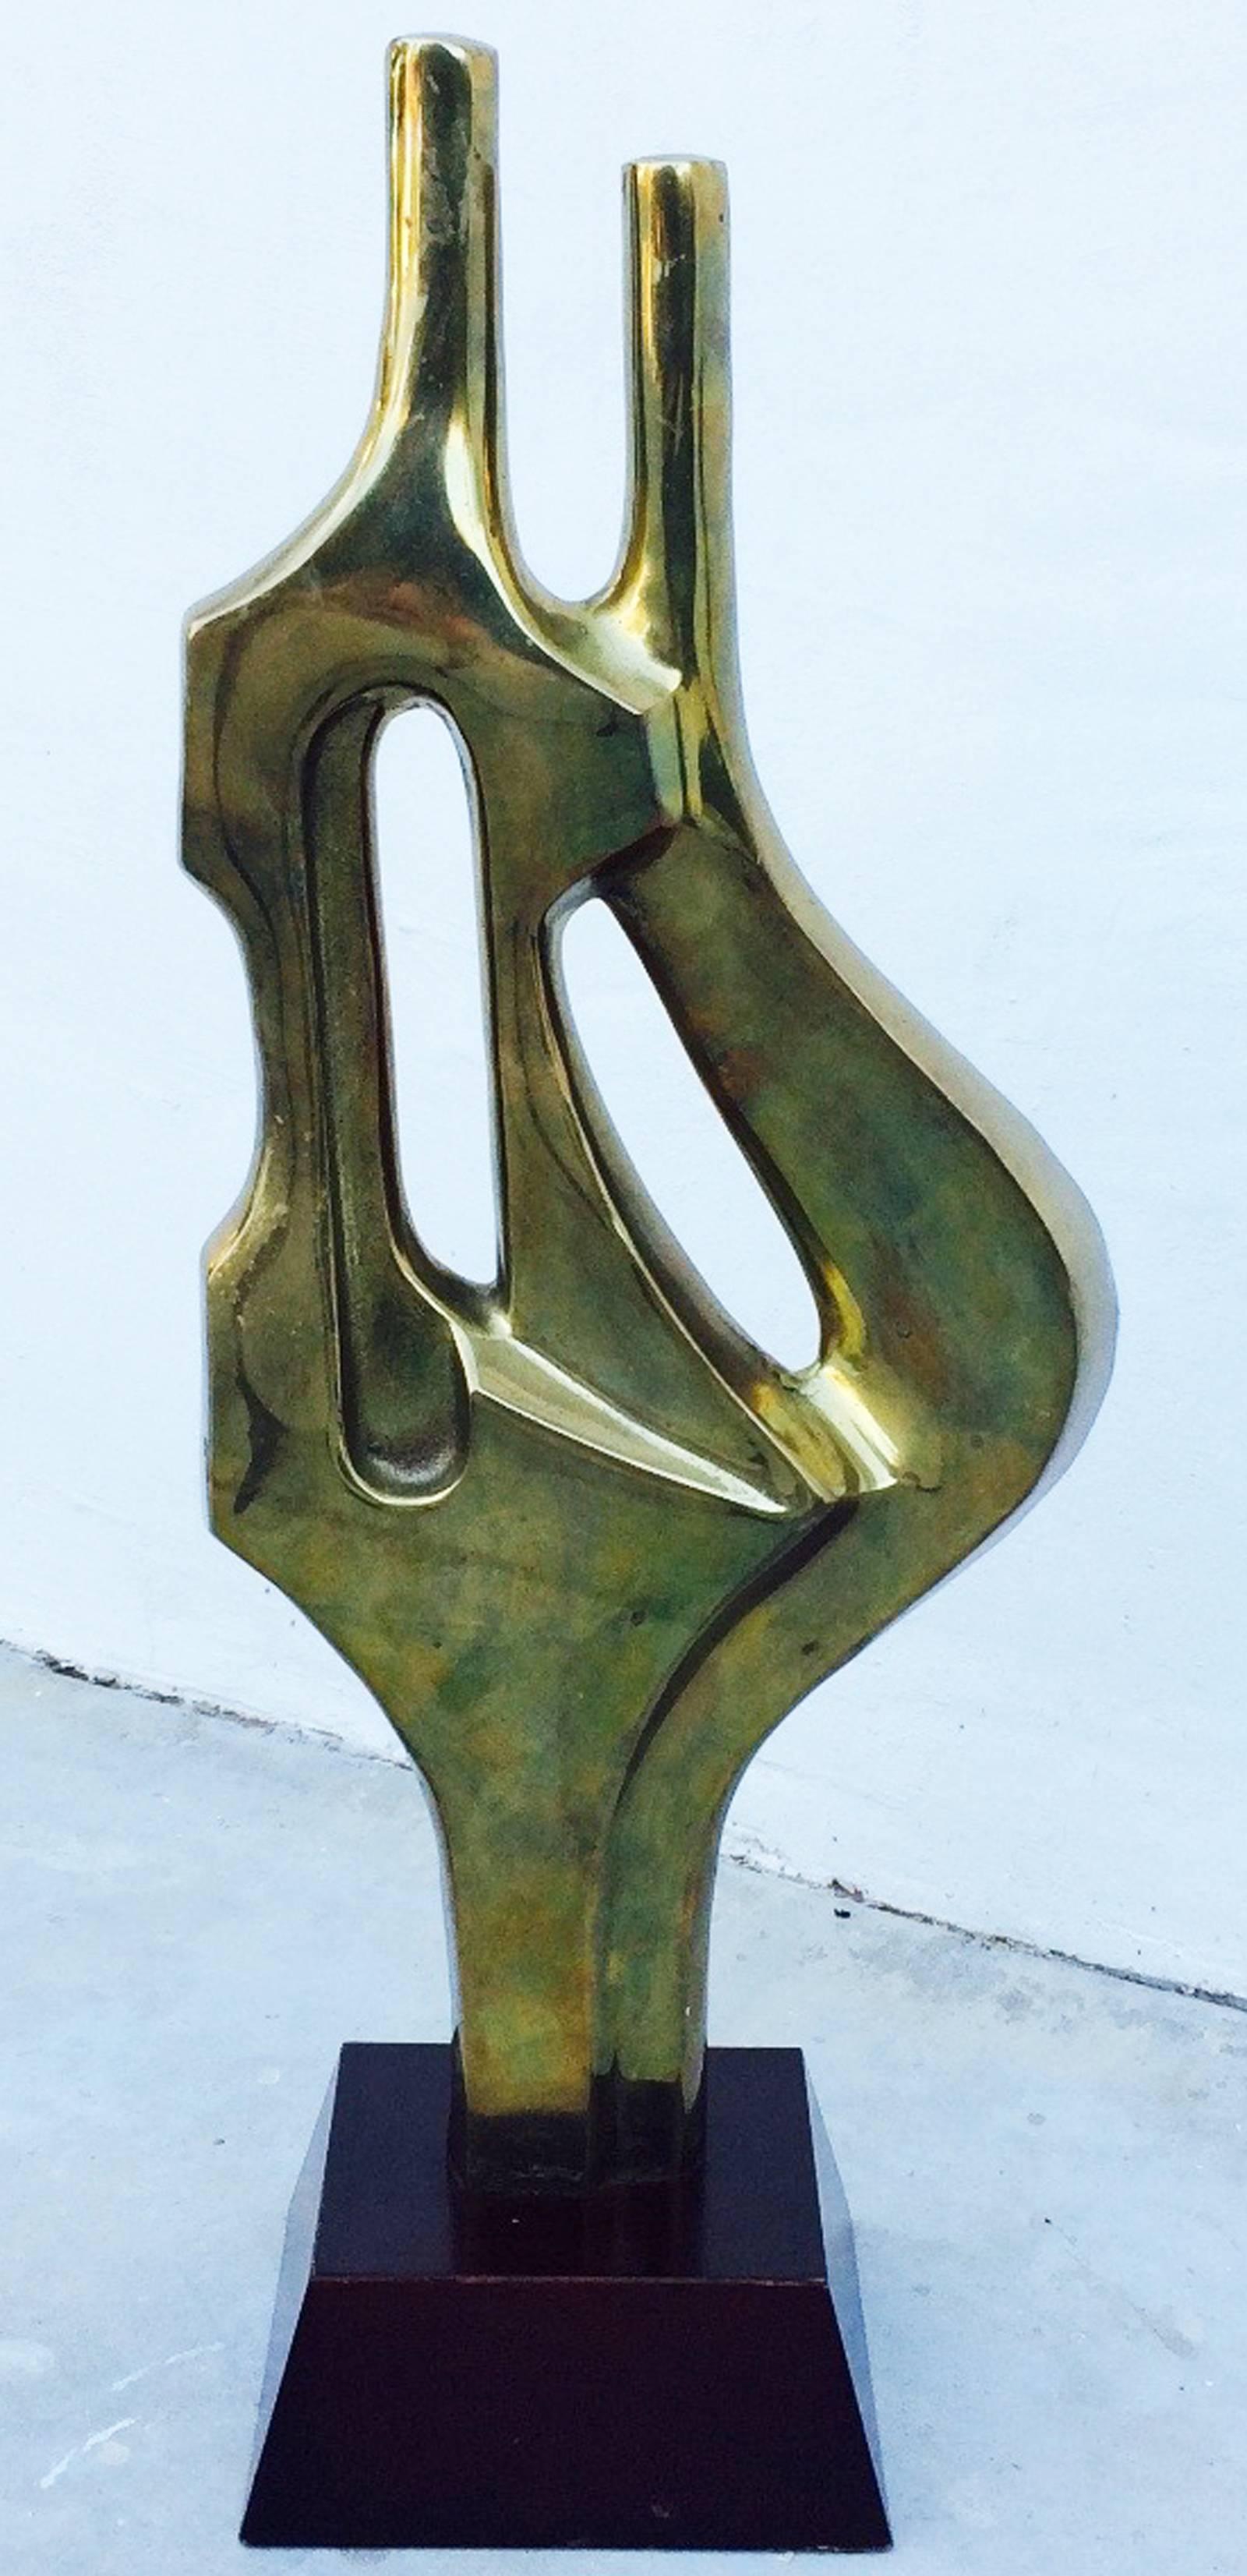 A fine Decorative Crafts sculpted brass item mounted on a ebonized wood Stand. Sculpted fluid item retains original brass finish and patina. Excellent with no issues.